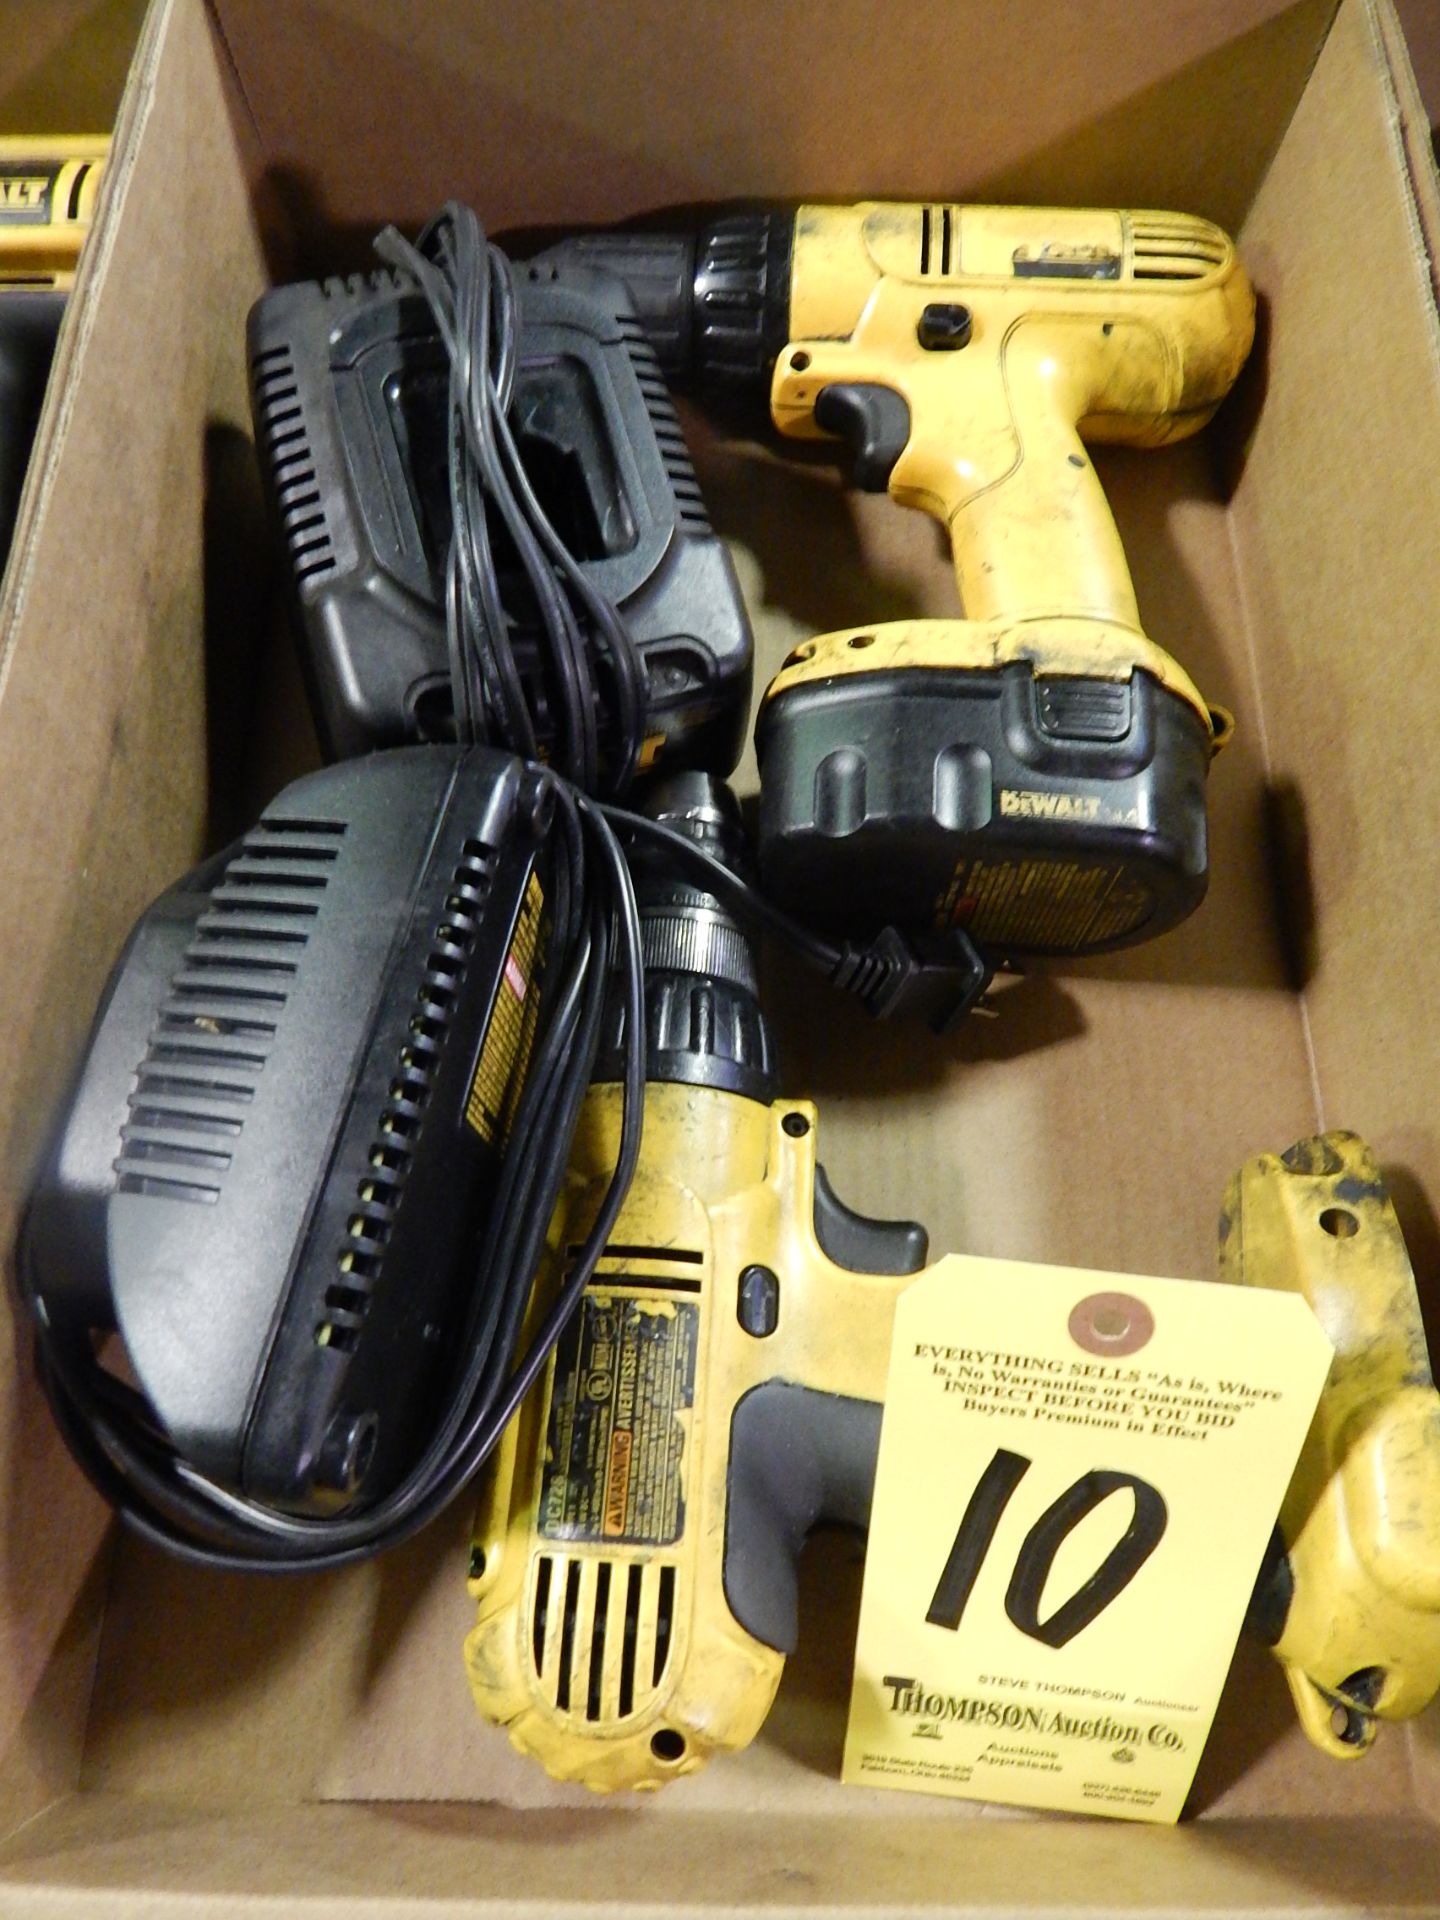 Dewalt Cordless Drills with Chargers